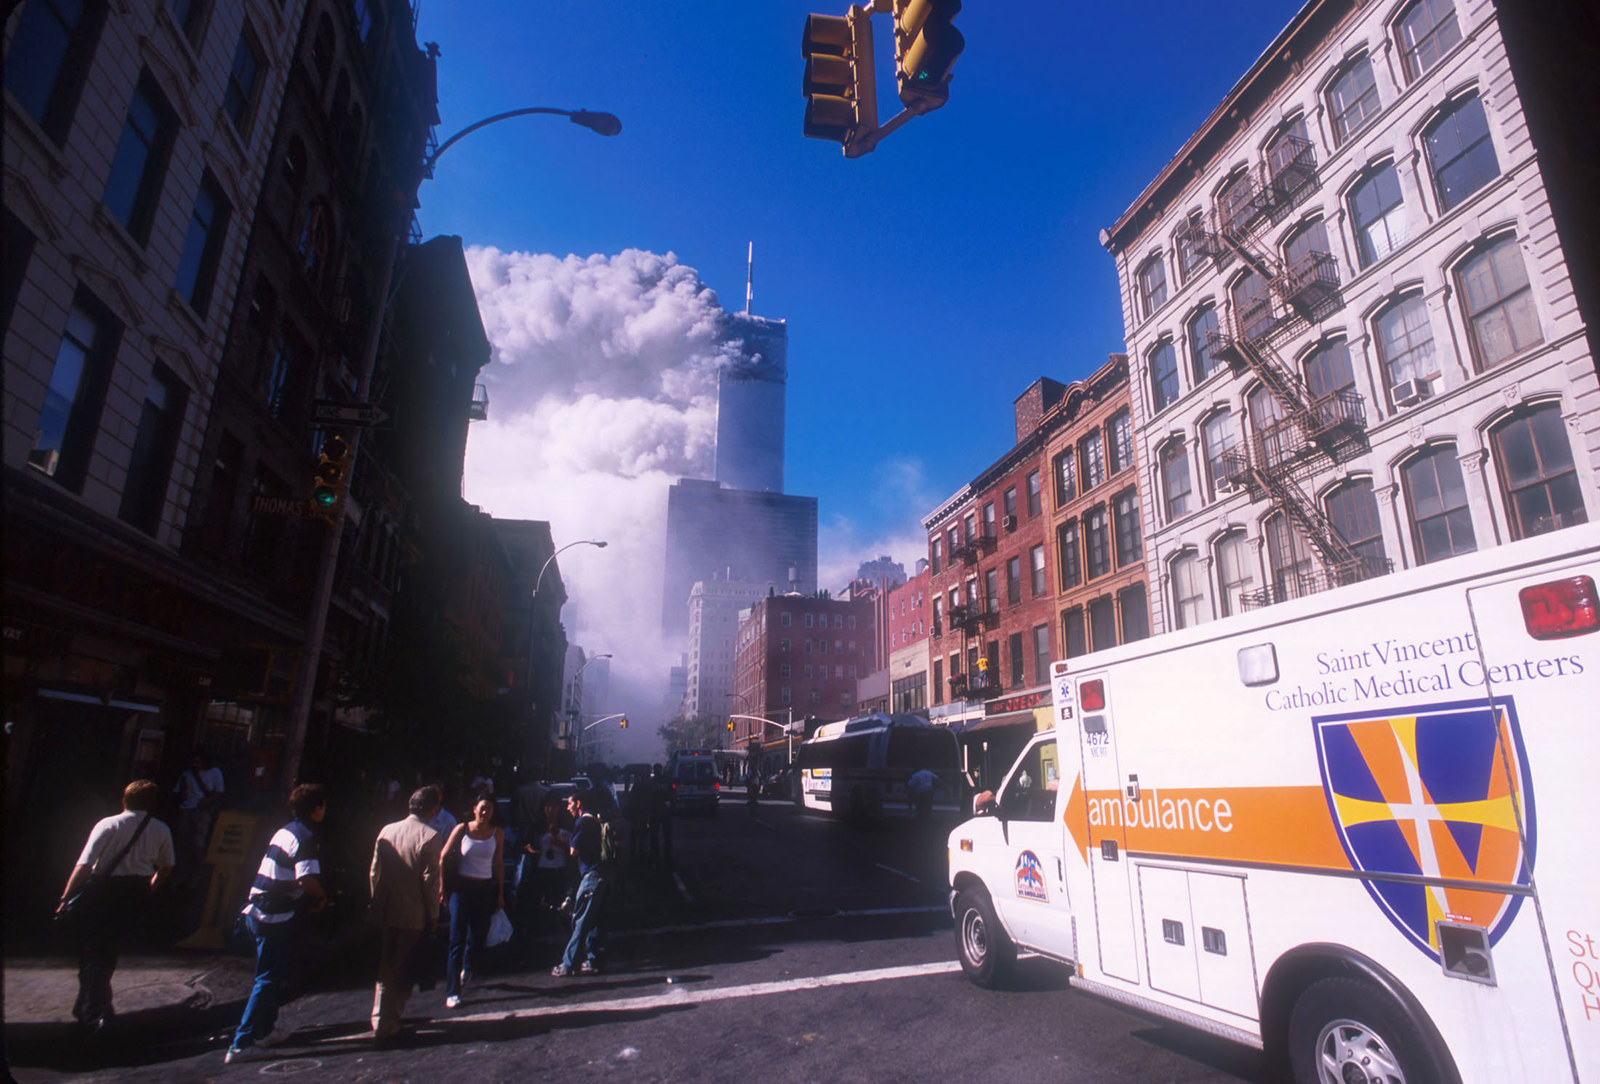 30 Harrowing Pictures From The 9/11 Terrorist Attacks